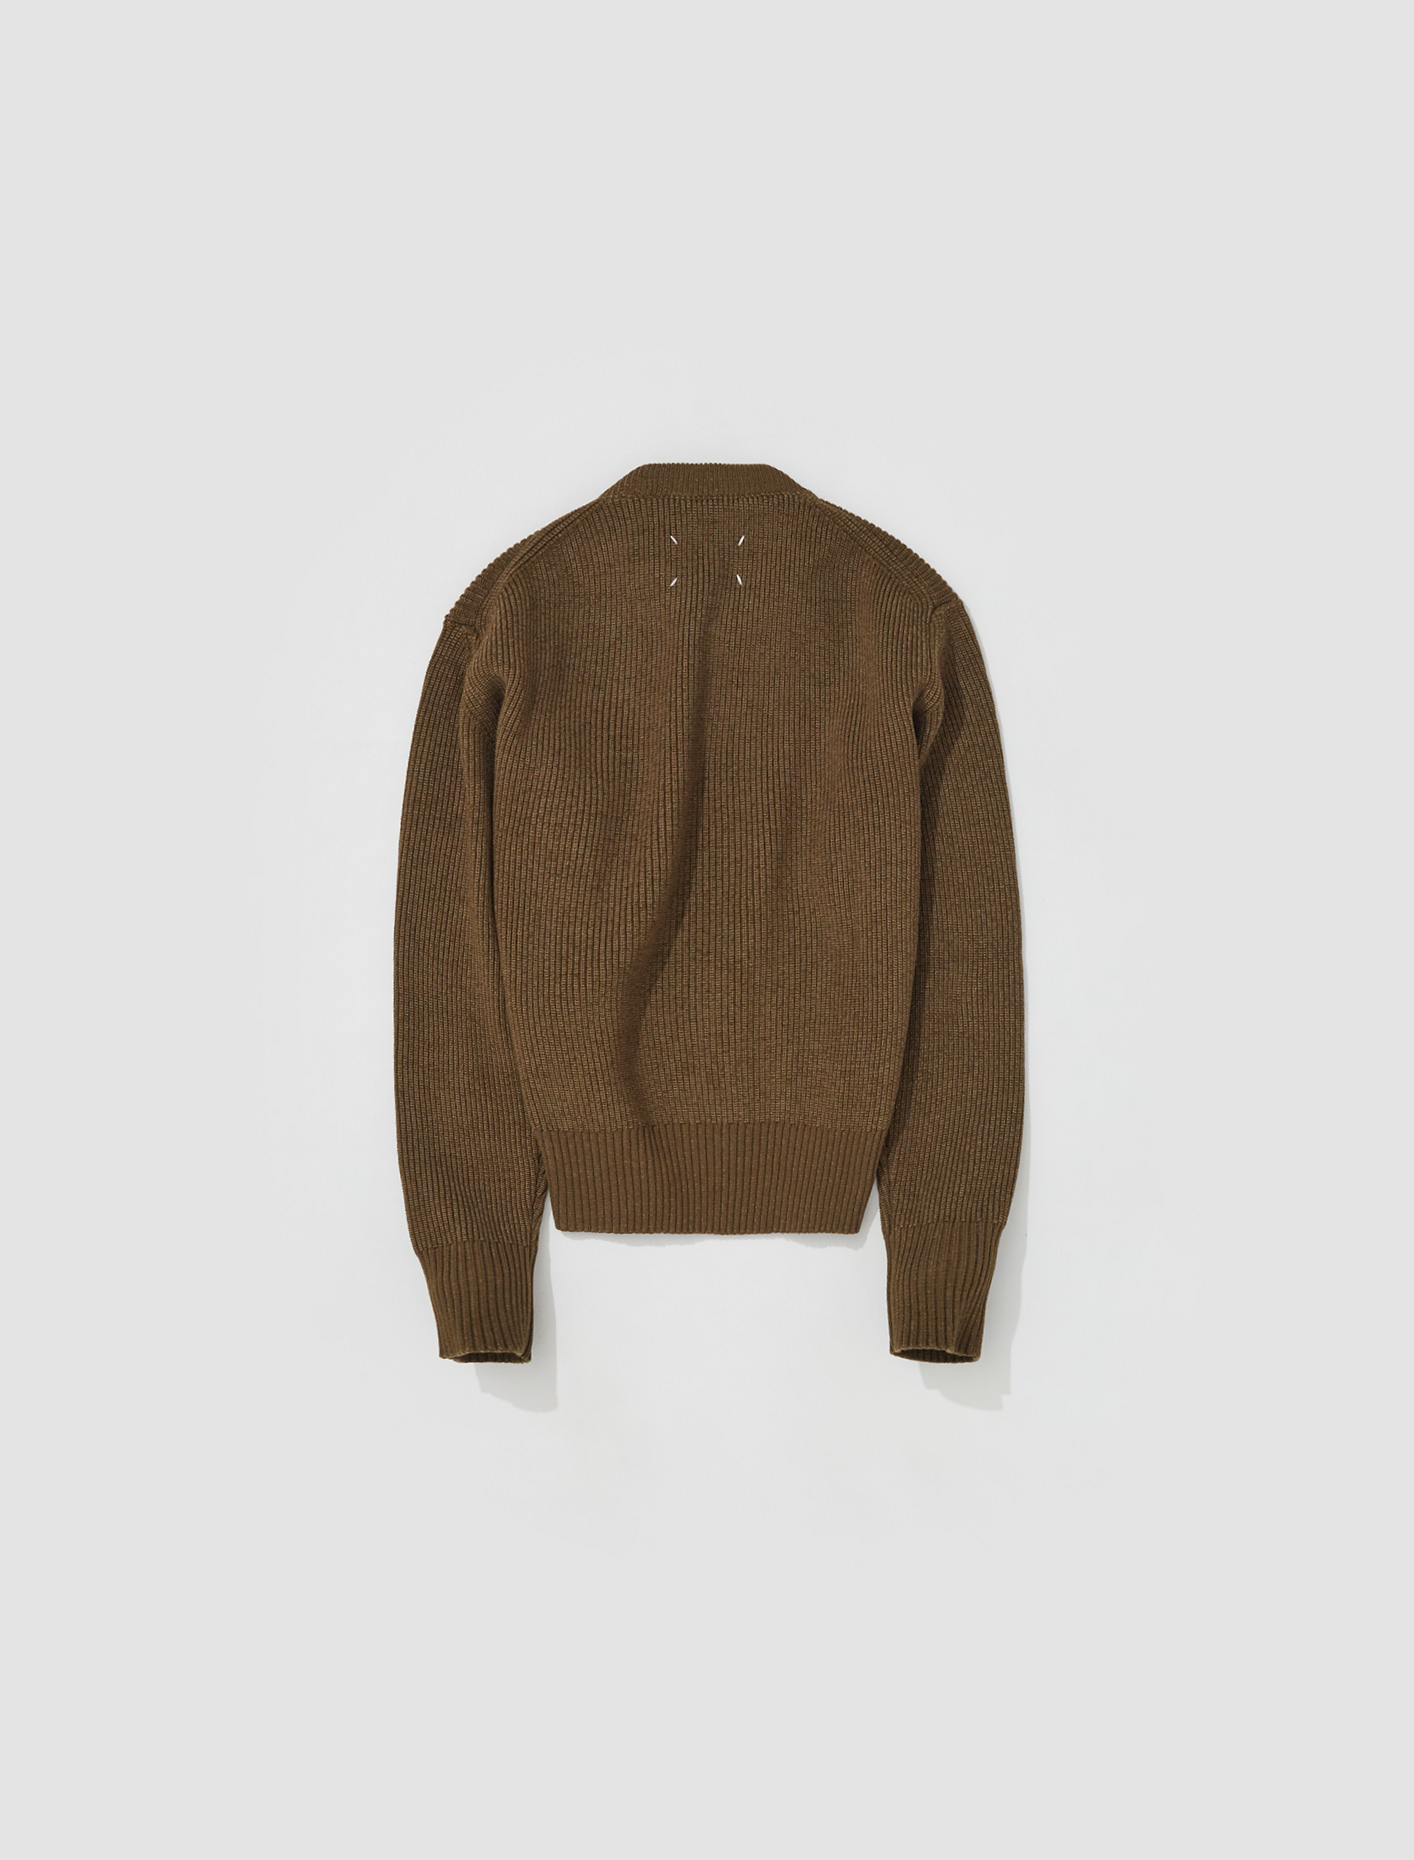 Maison Margiela Cable Knit Sweater in Olive